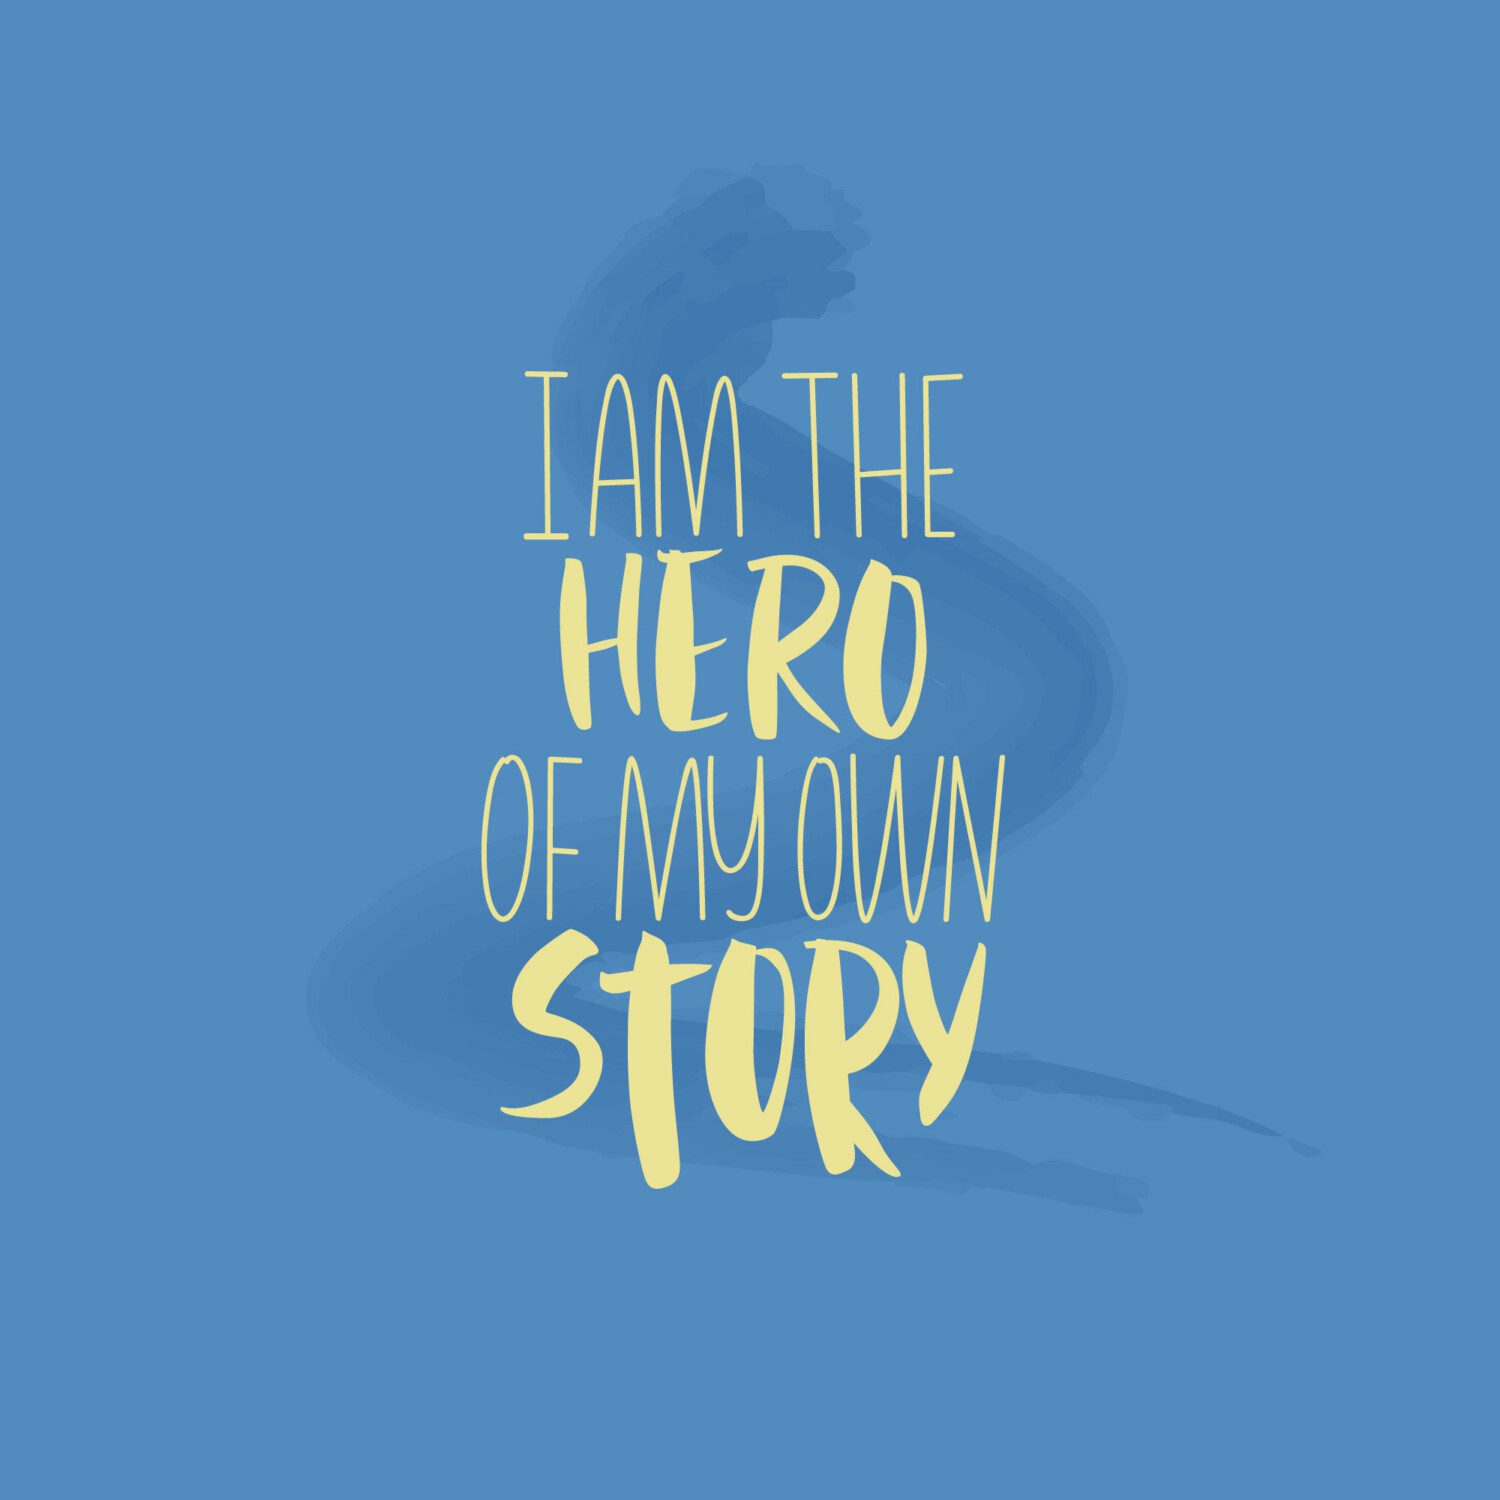 I am the hero of my own story.